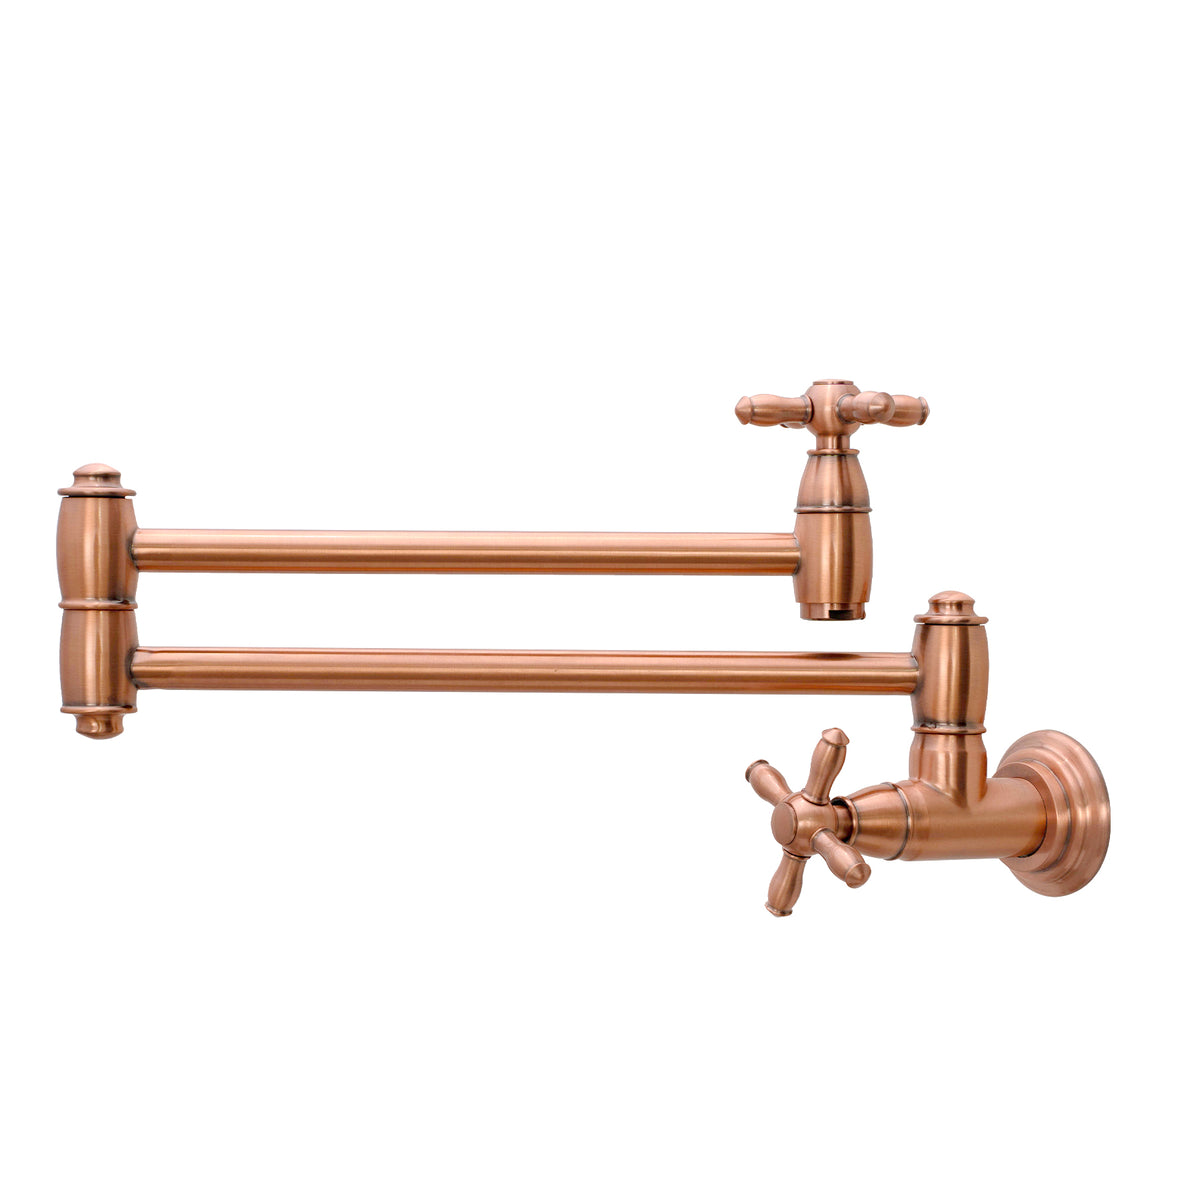 Akicon Pot Filler Faucet - Solid Brass Wall Mount Kitchen Faucets with Double Stretchable Joint Swing Arms, Kitchen Folding Faucet over Stove, Copper Stove Kitchen Faucet - AK98288N1